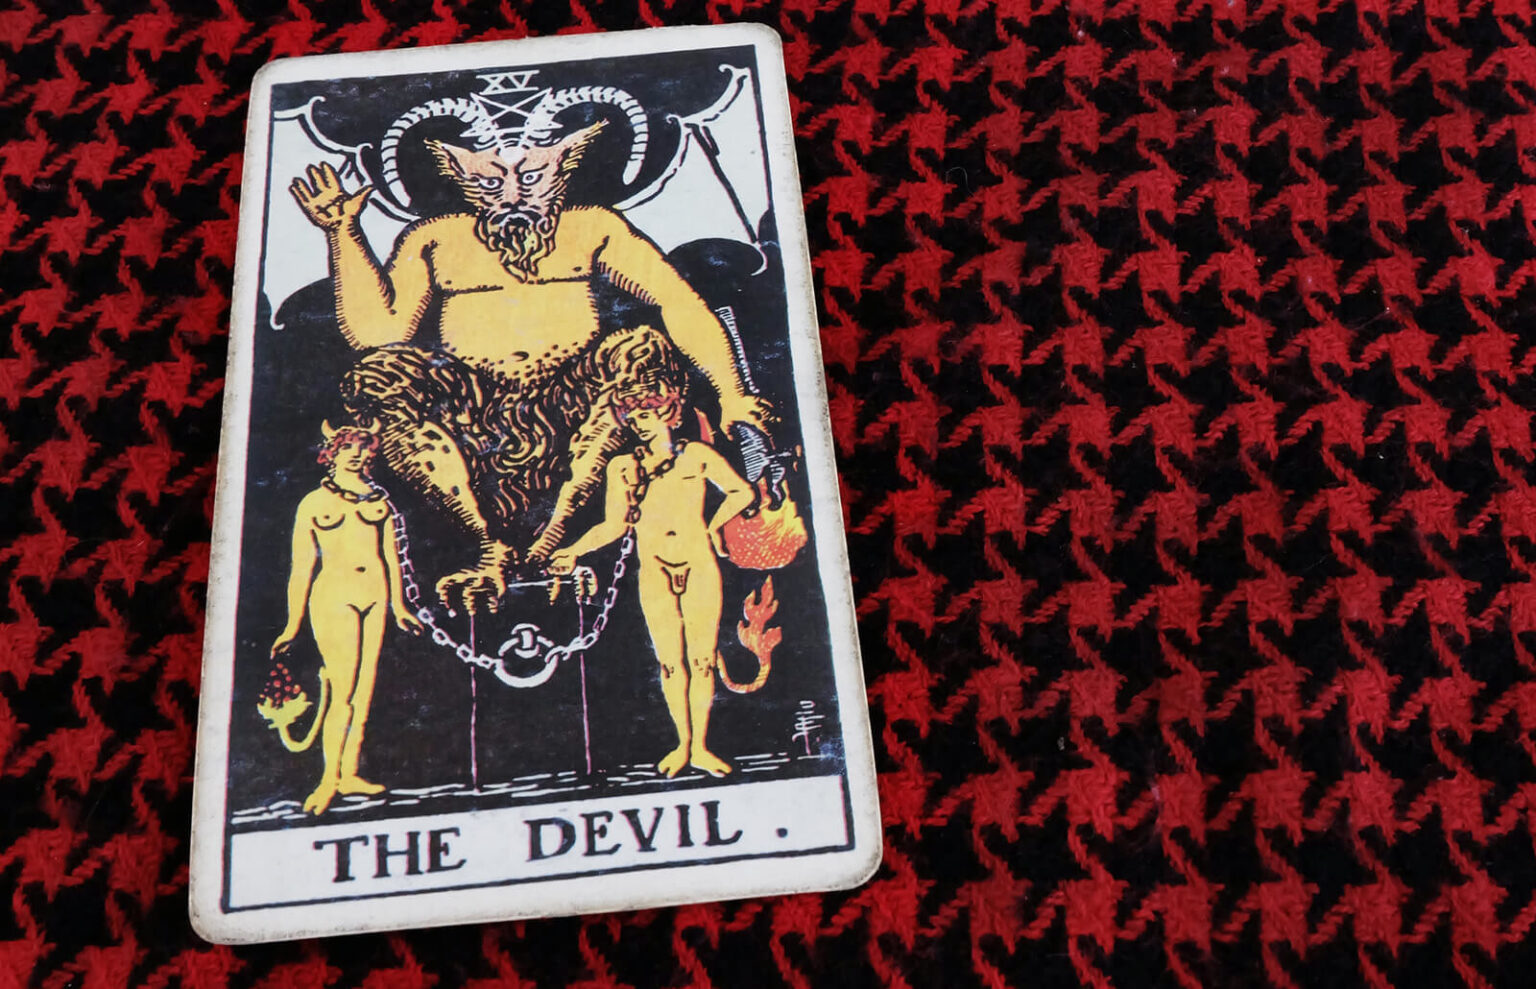 Are you getting to know your tarot deck for the first time? Learn more about scary-sounding cards like The Devil so you can be prepared if they come up!